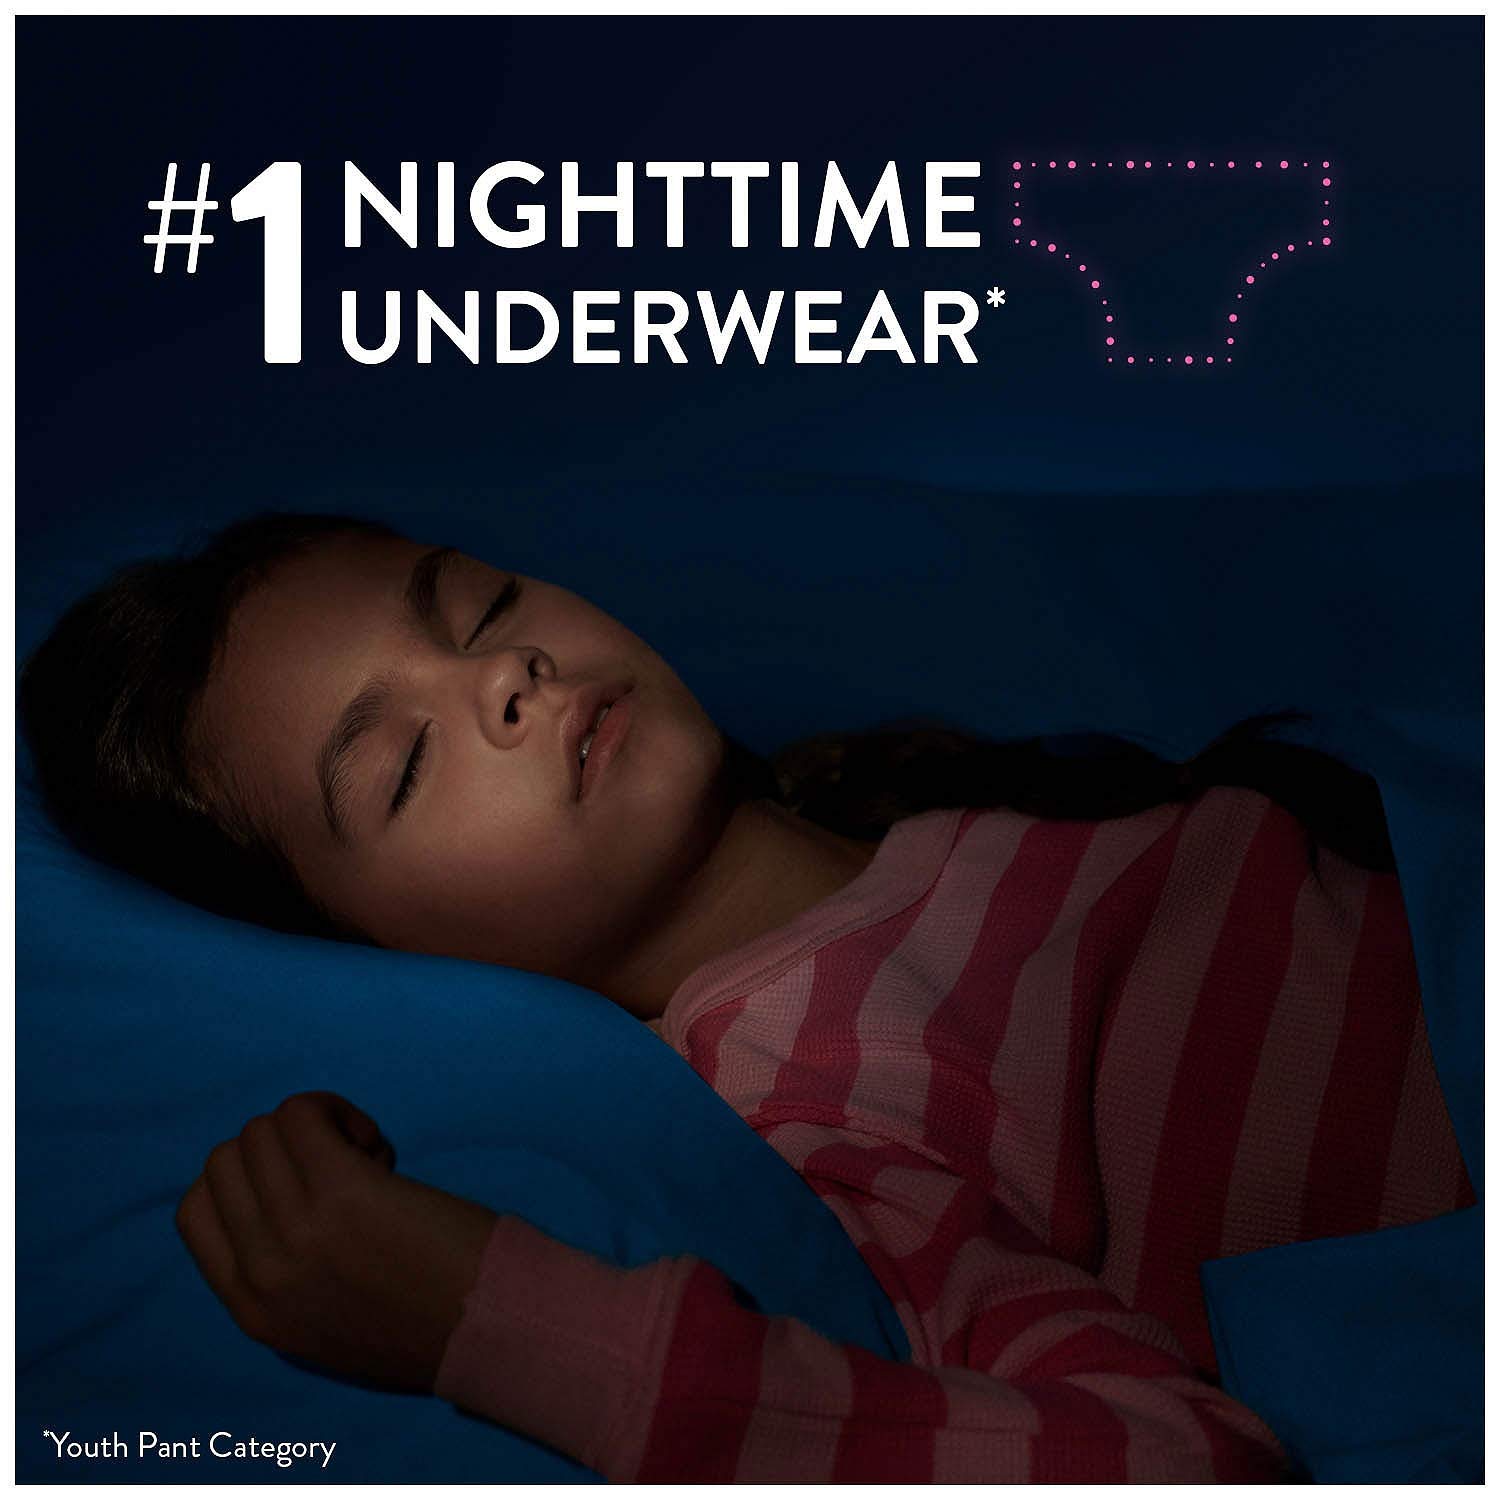 GoodNites Bedtime Bedwetting Underwear for Girls, Size S/M, 74 ct.